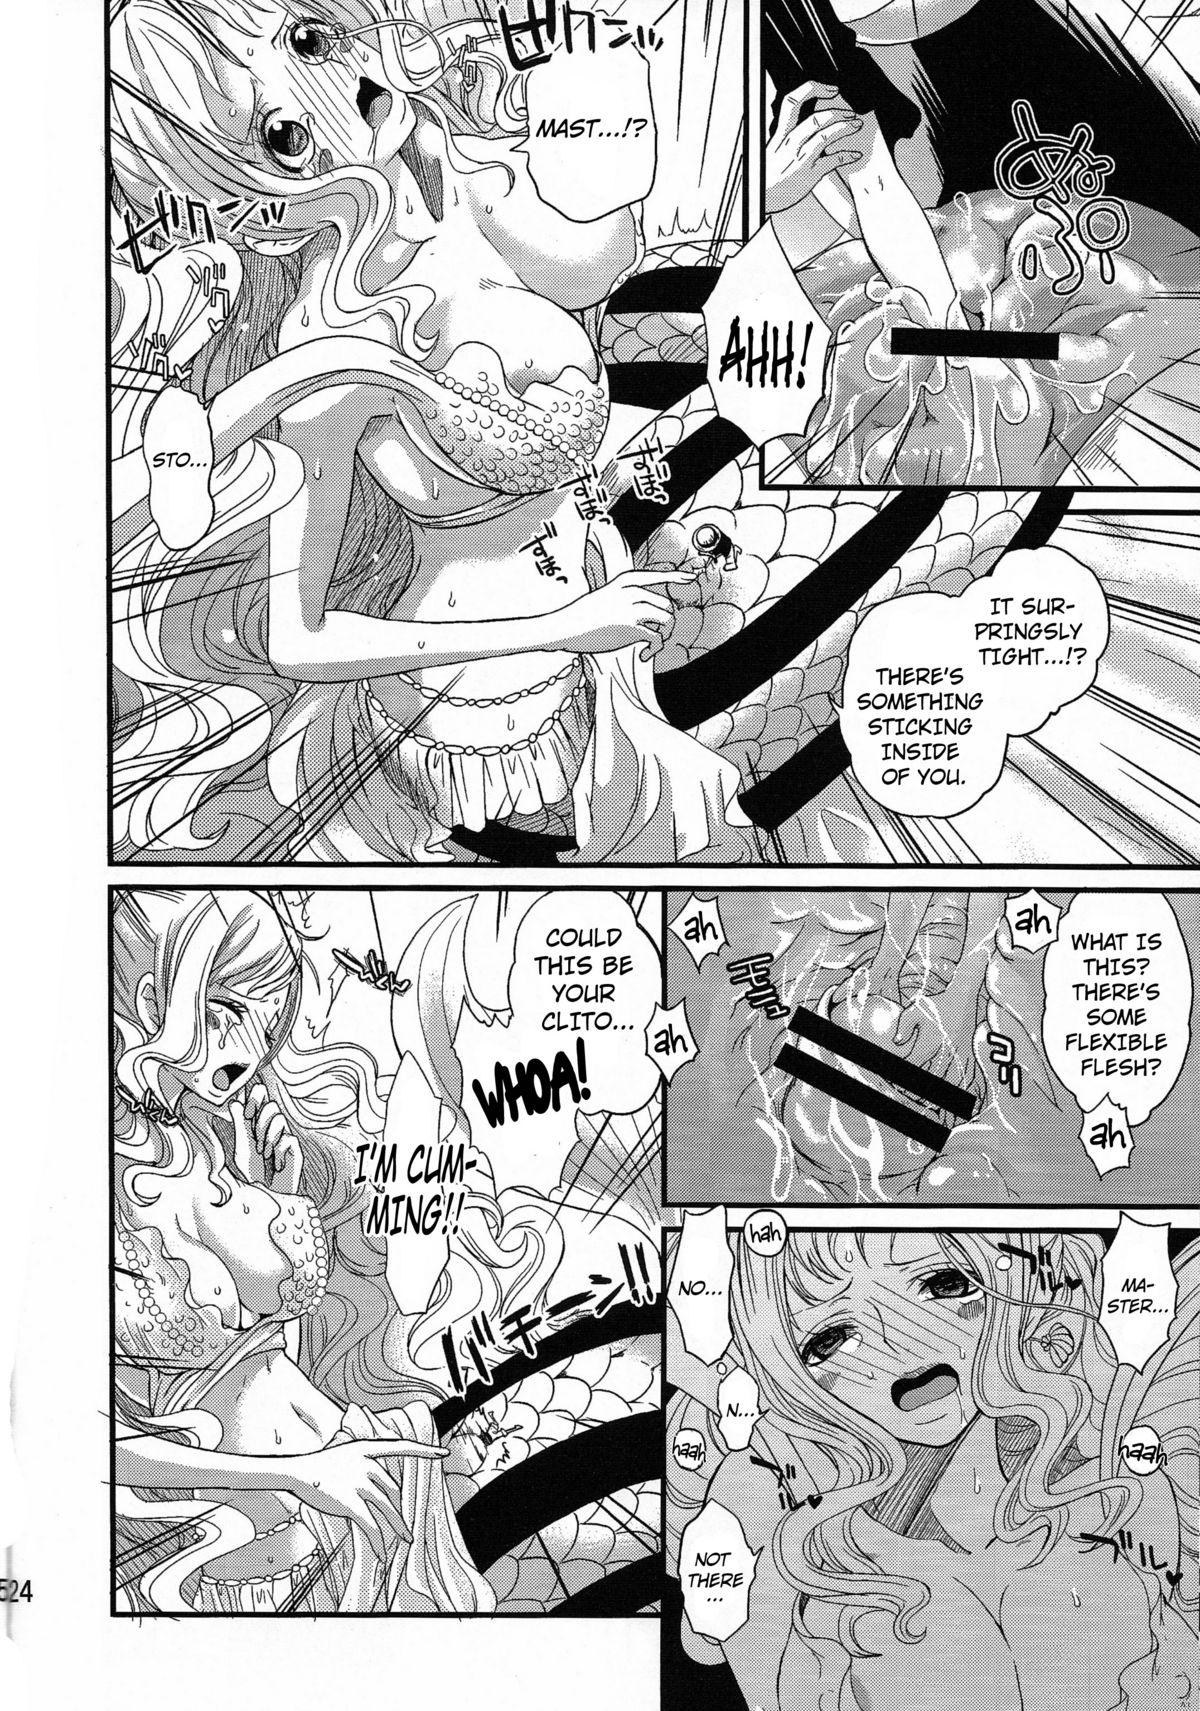 Ningyohime Page 23 Of 25 one piece uncensored hentai, Ningyohime Page 23 Of...